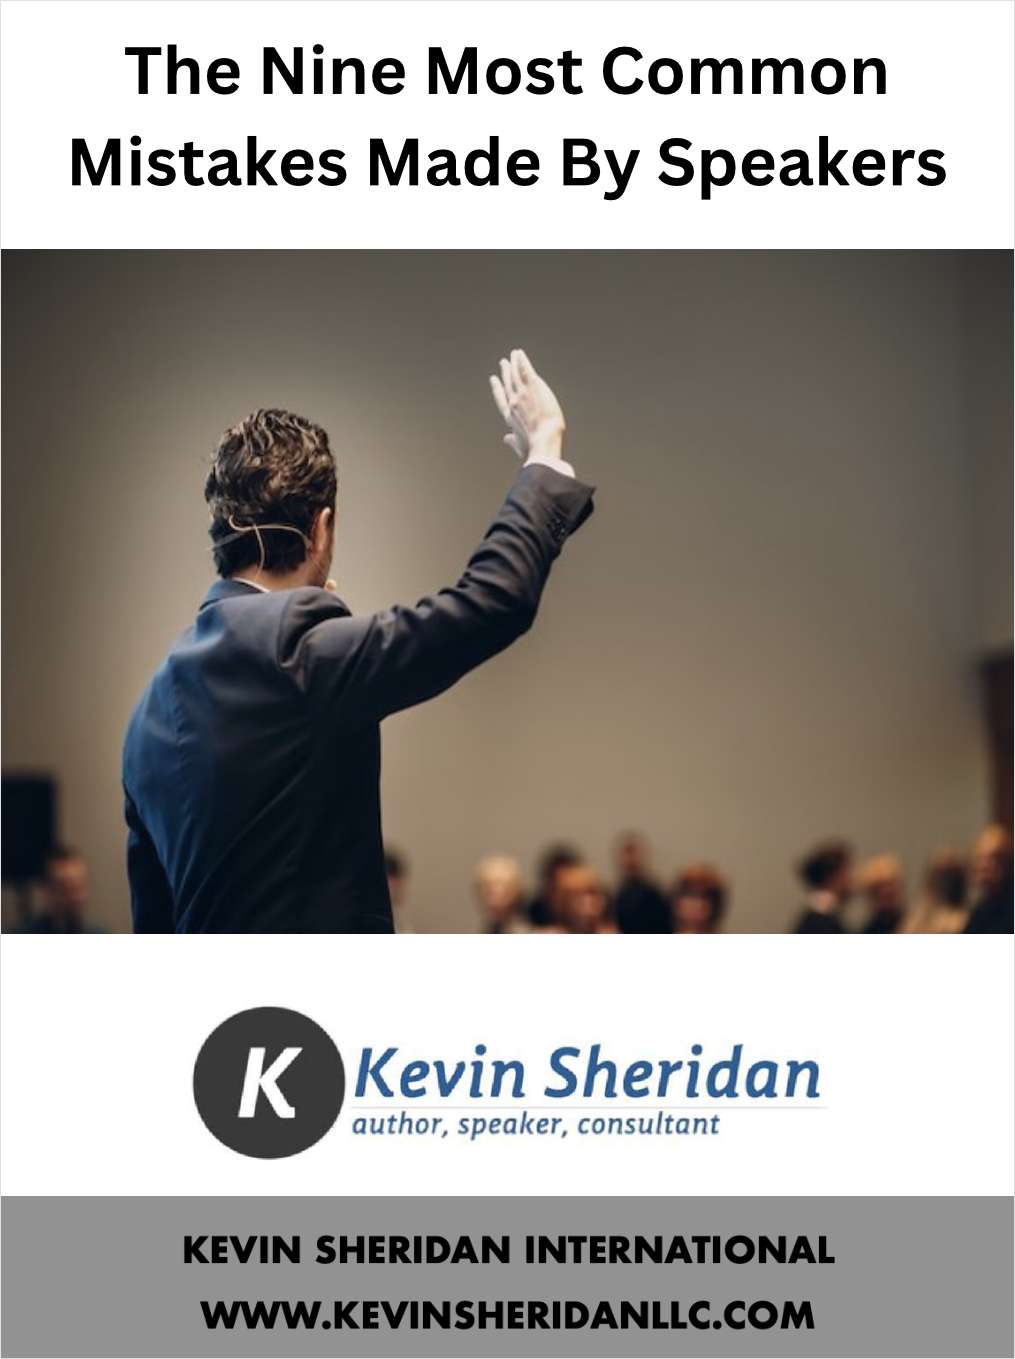 The Nine Most Common Mistakes Made By Speakers